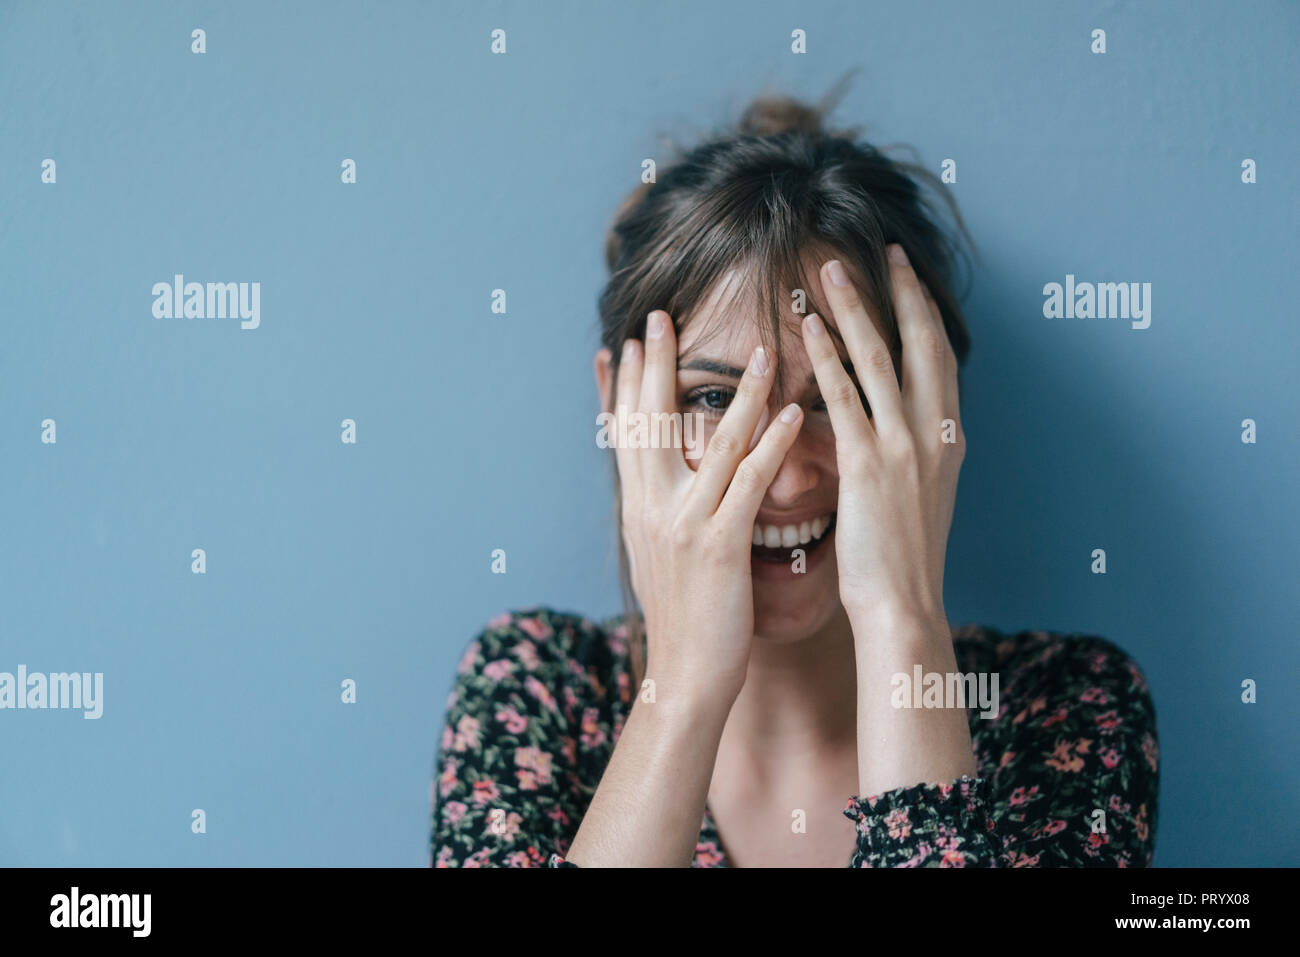 Beautiful woman covering face, portrait Stock Photo